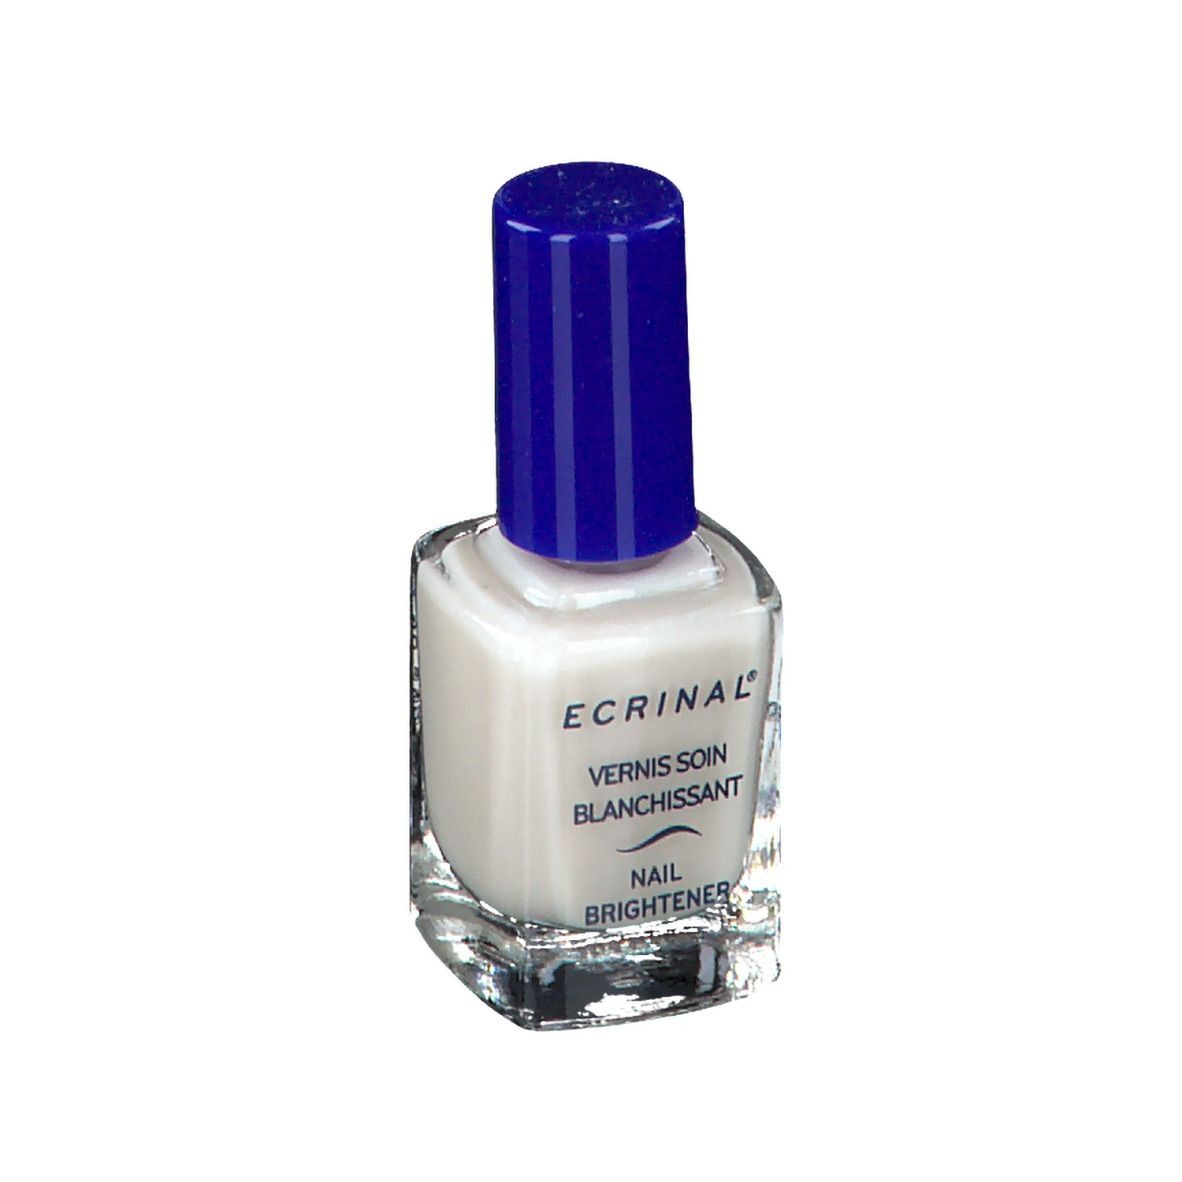 Ecrinal soin blanchissant ongles 1 pc(s) - Redcare Pharmacie